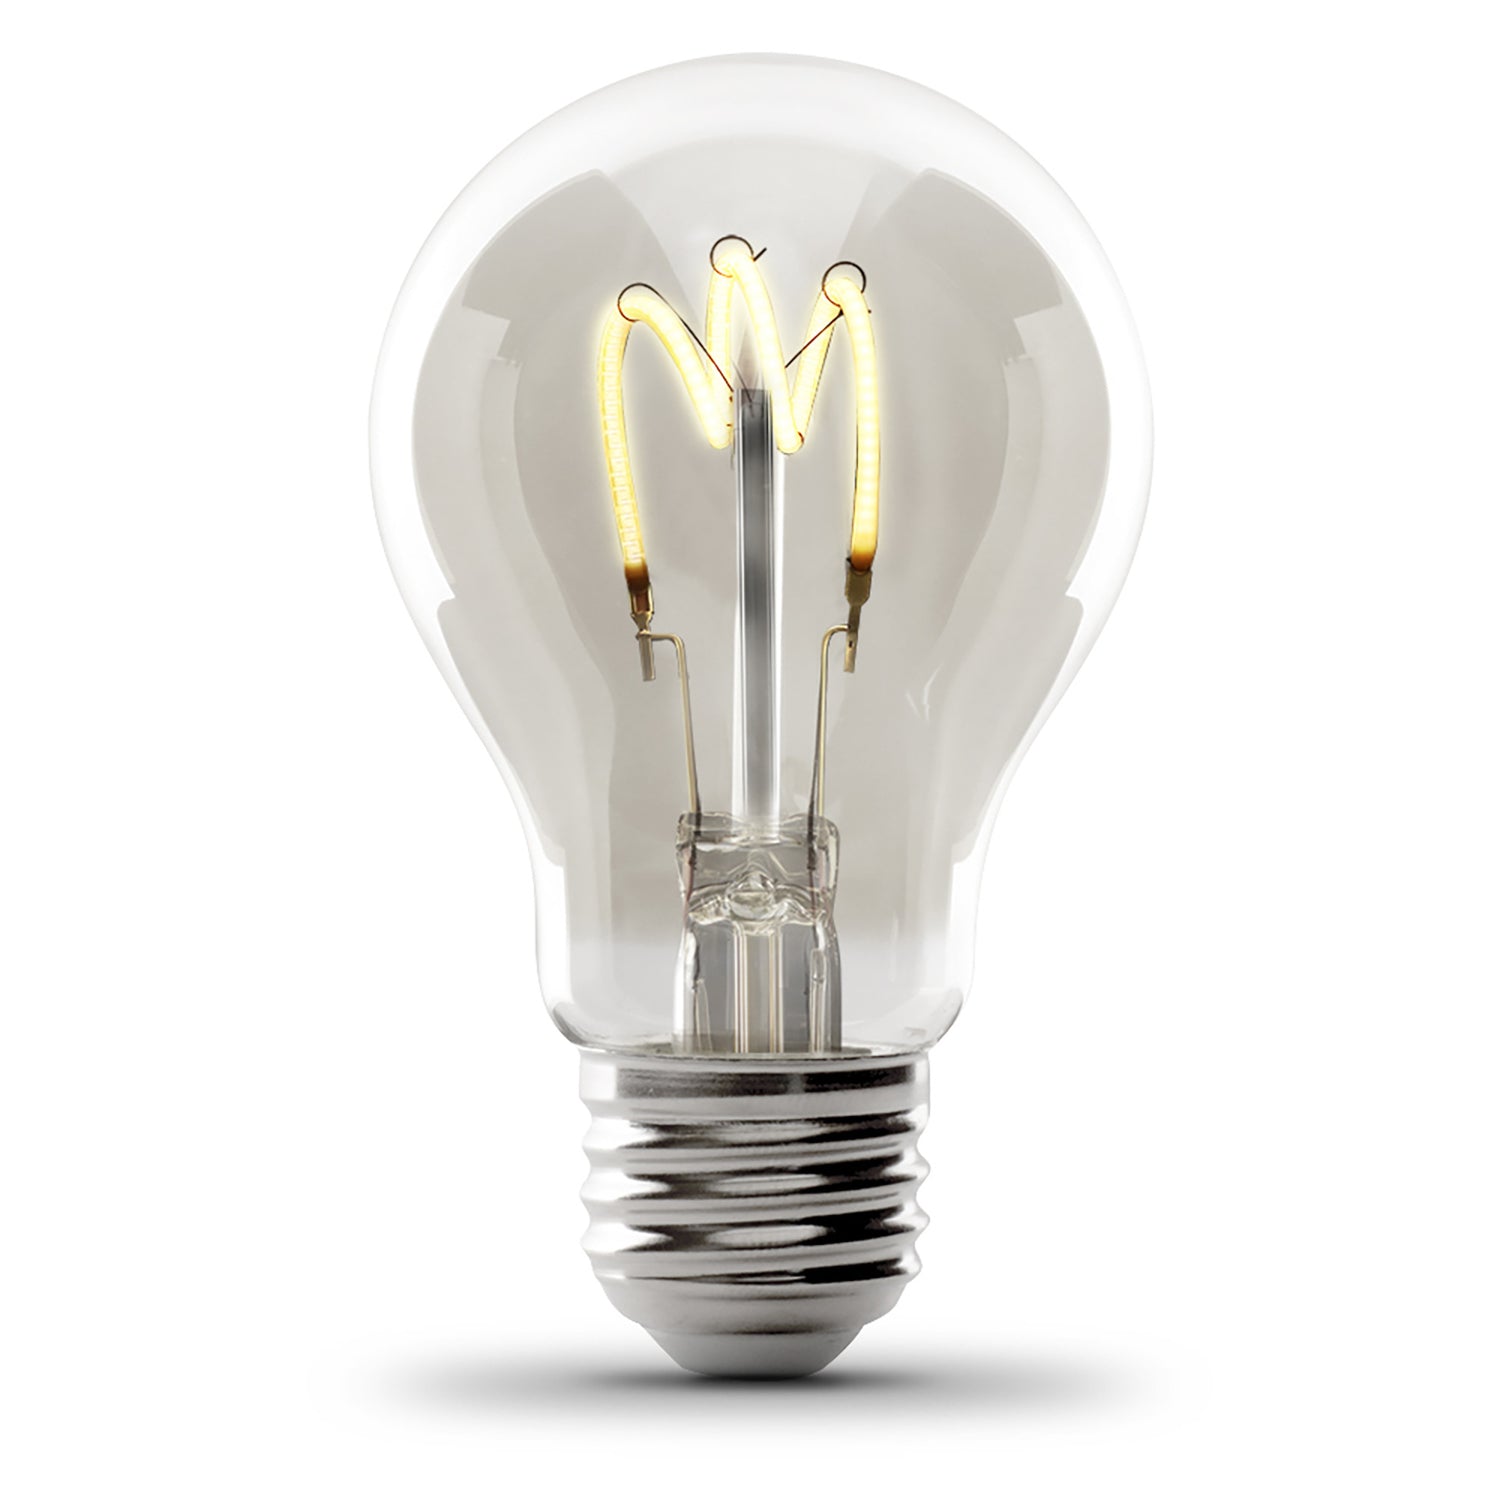 4.5W (40W Replacement) A19 E26 Dimmable H Shape Filament Clear Glass Vintage Edison LED Light Bulb, Warm White